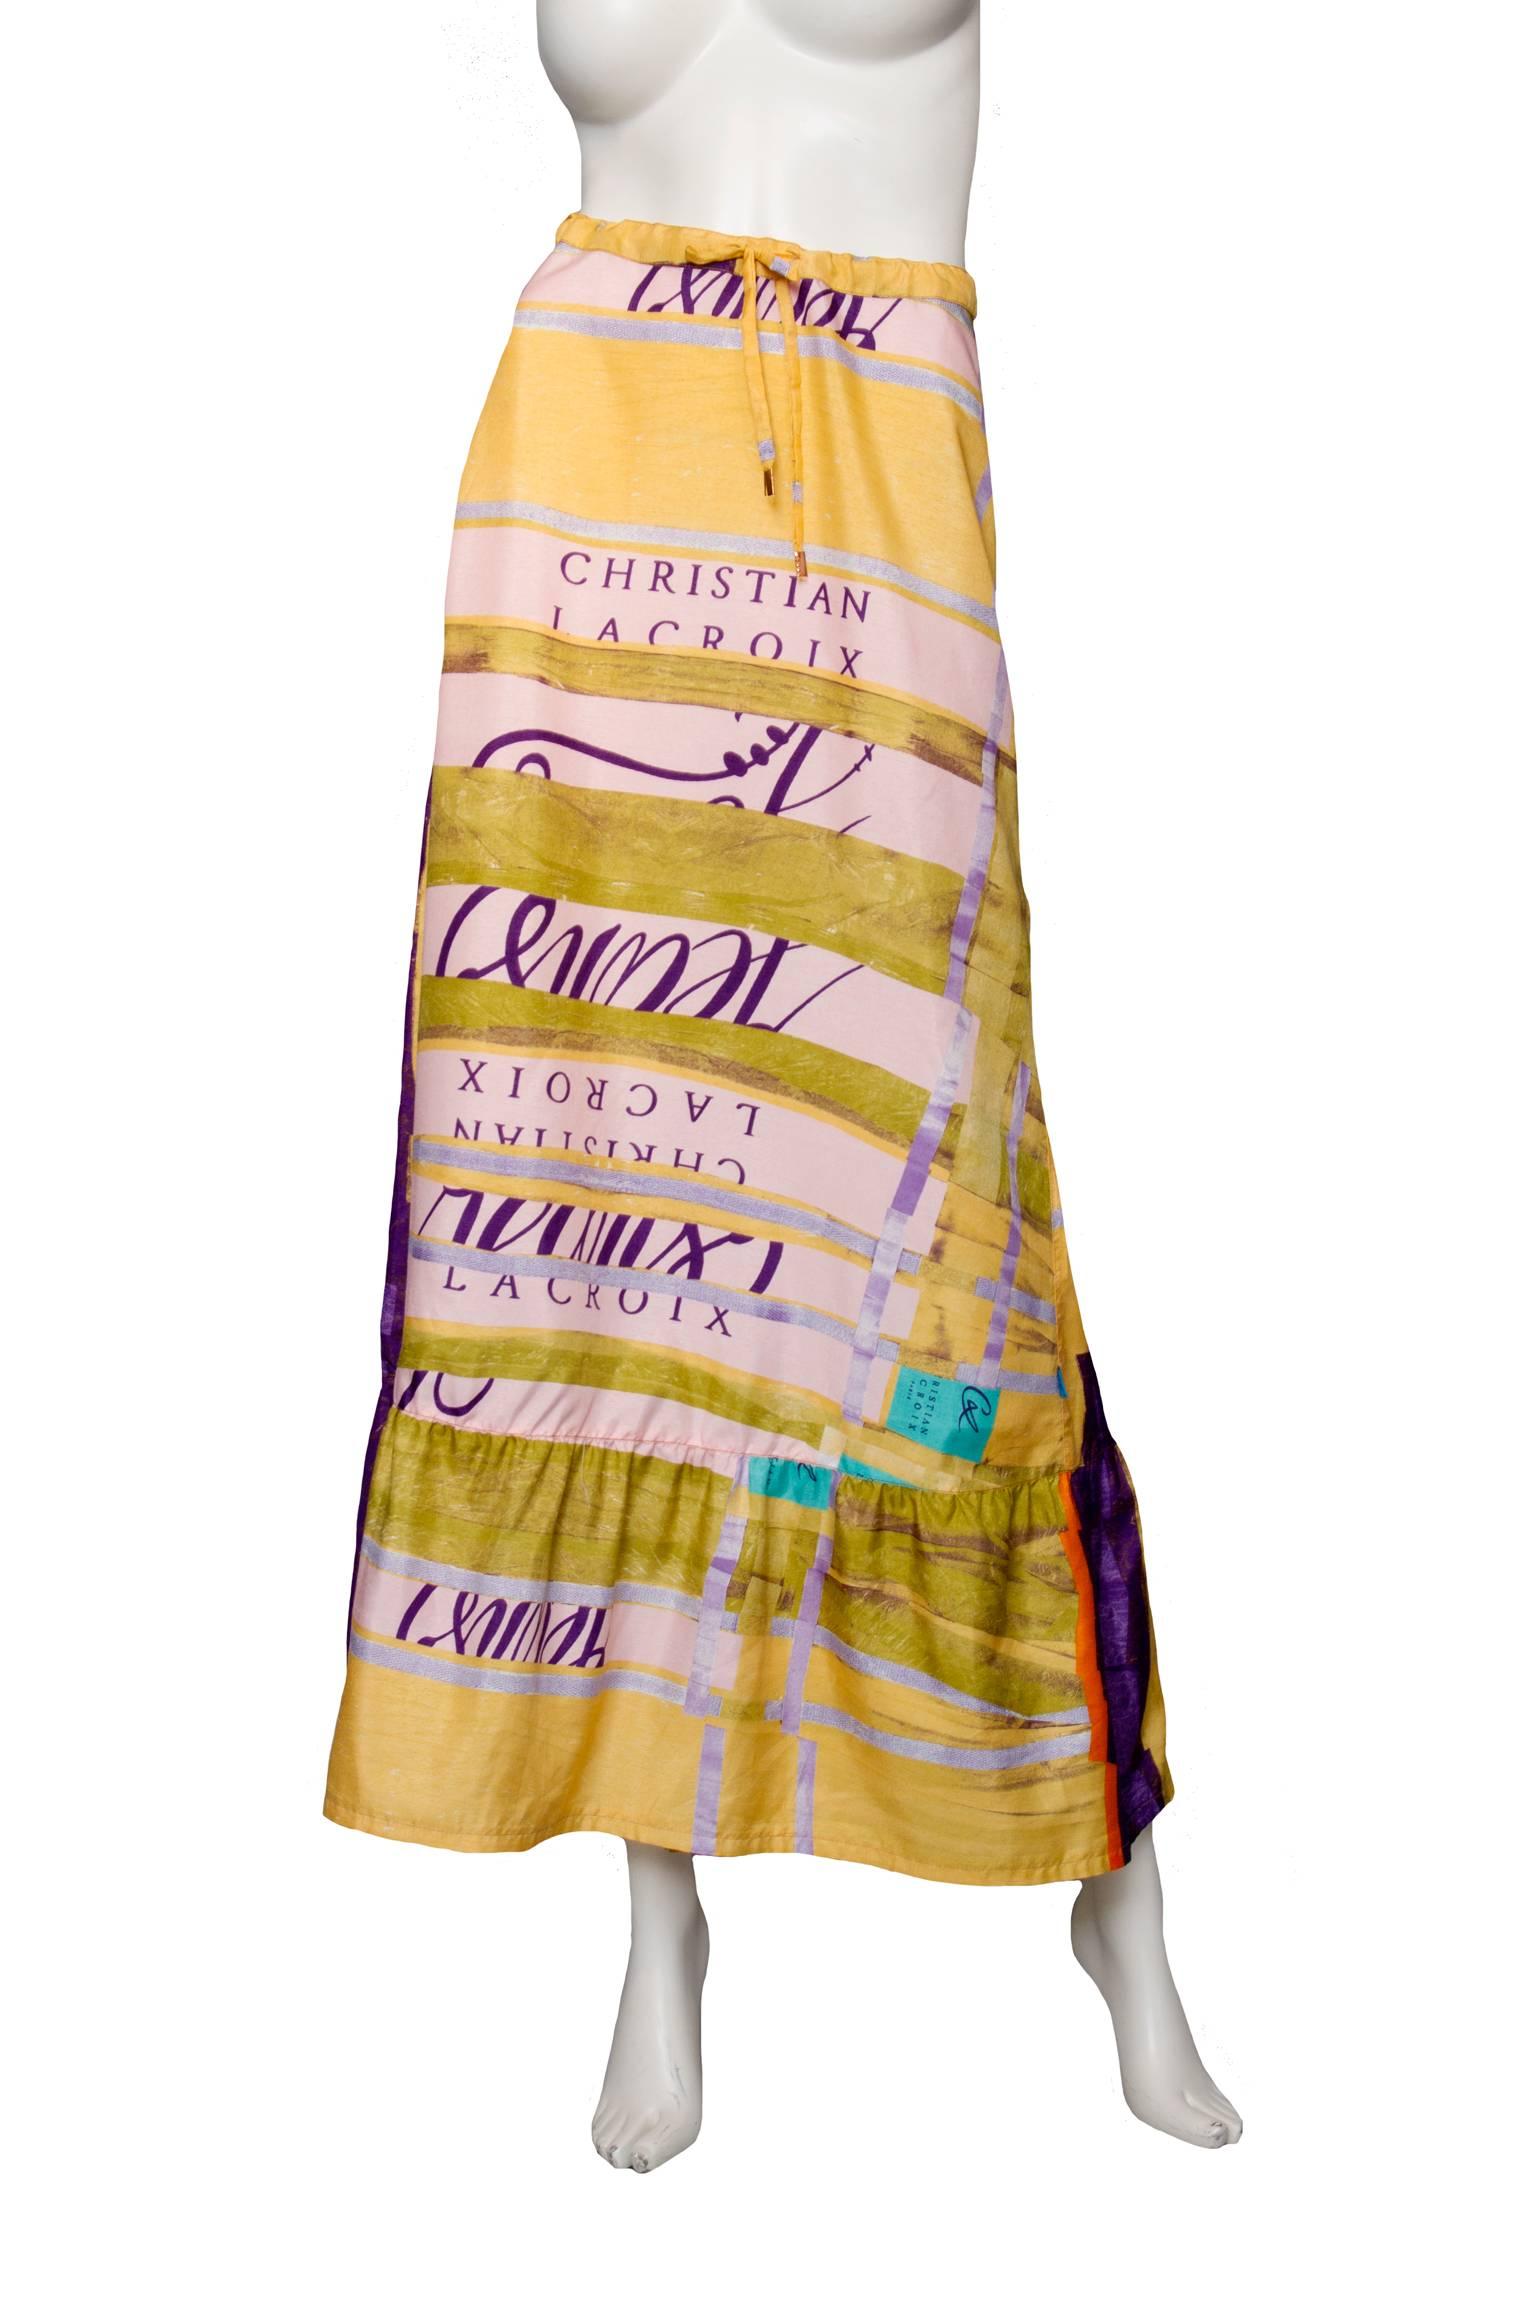 A graphic 1990s Christian Lacroix peasant silk skirt with a ruffle hemline and colorful print held in a bright yellow, blue and purple color scheme with purple Lacroix insignias. The skirt features both a draw string closure at the front and a